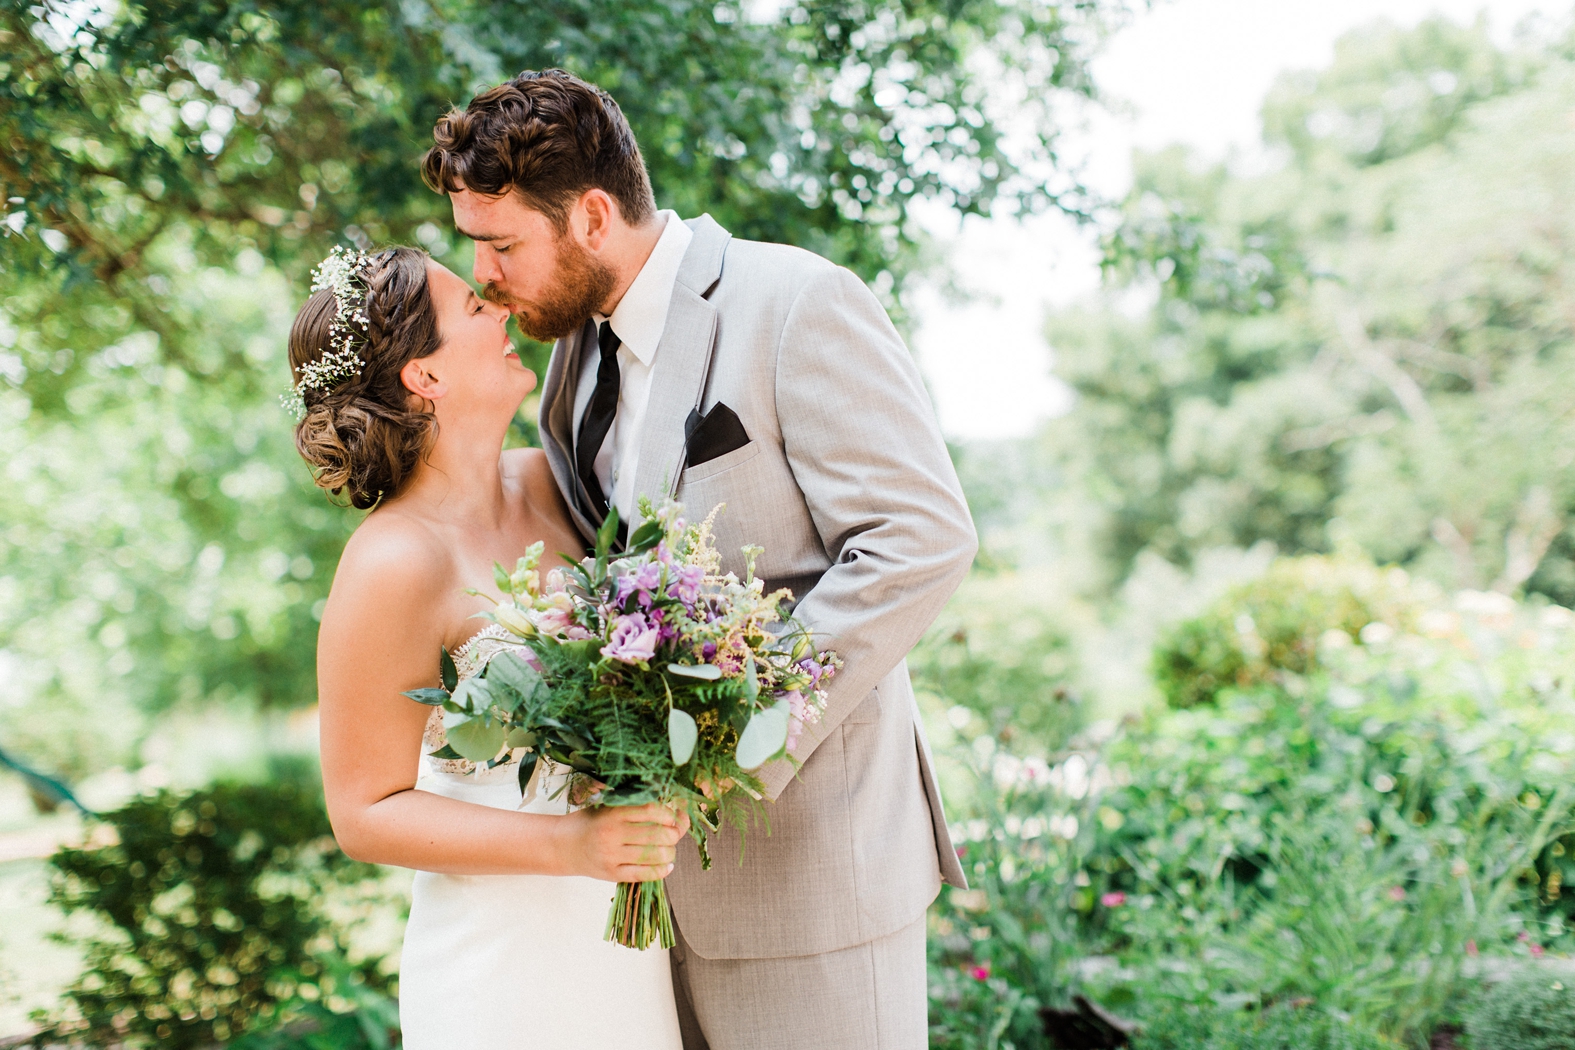 Groom in gray suit with black tie kissing bride on nose; wedding portrait; bride flower crown and purple and succulent bouquet